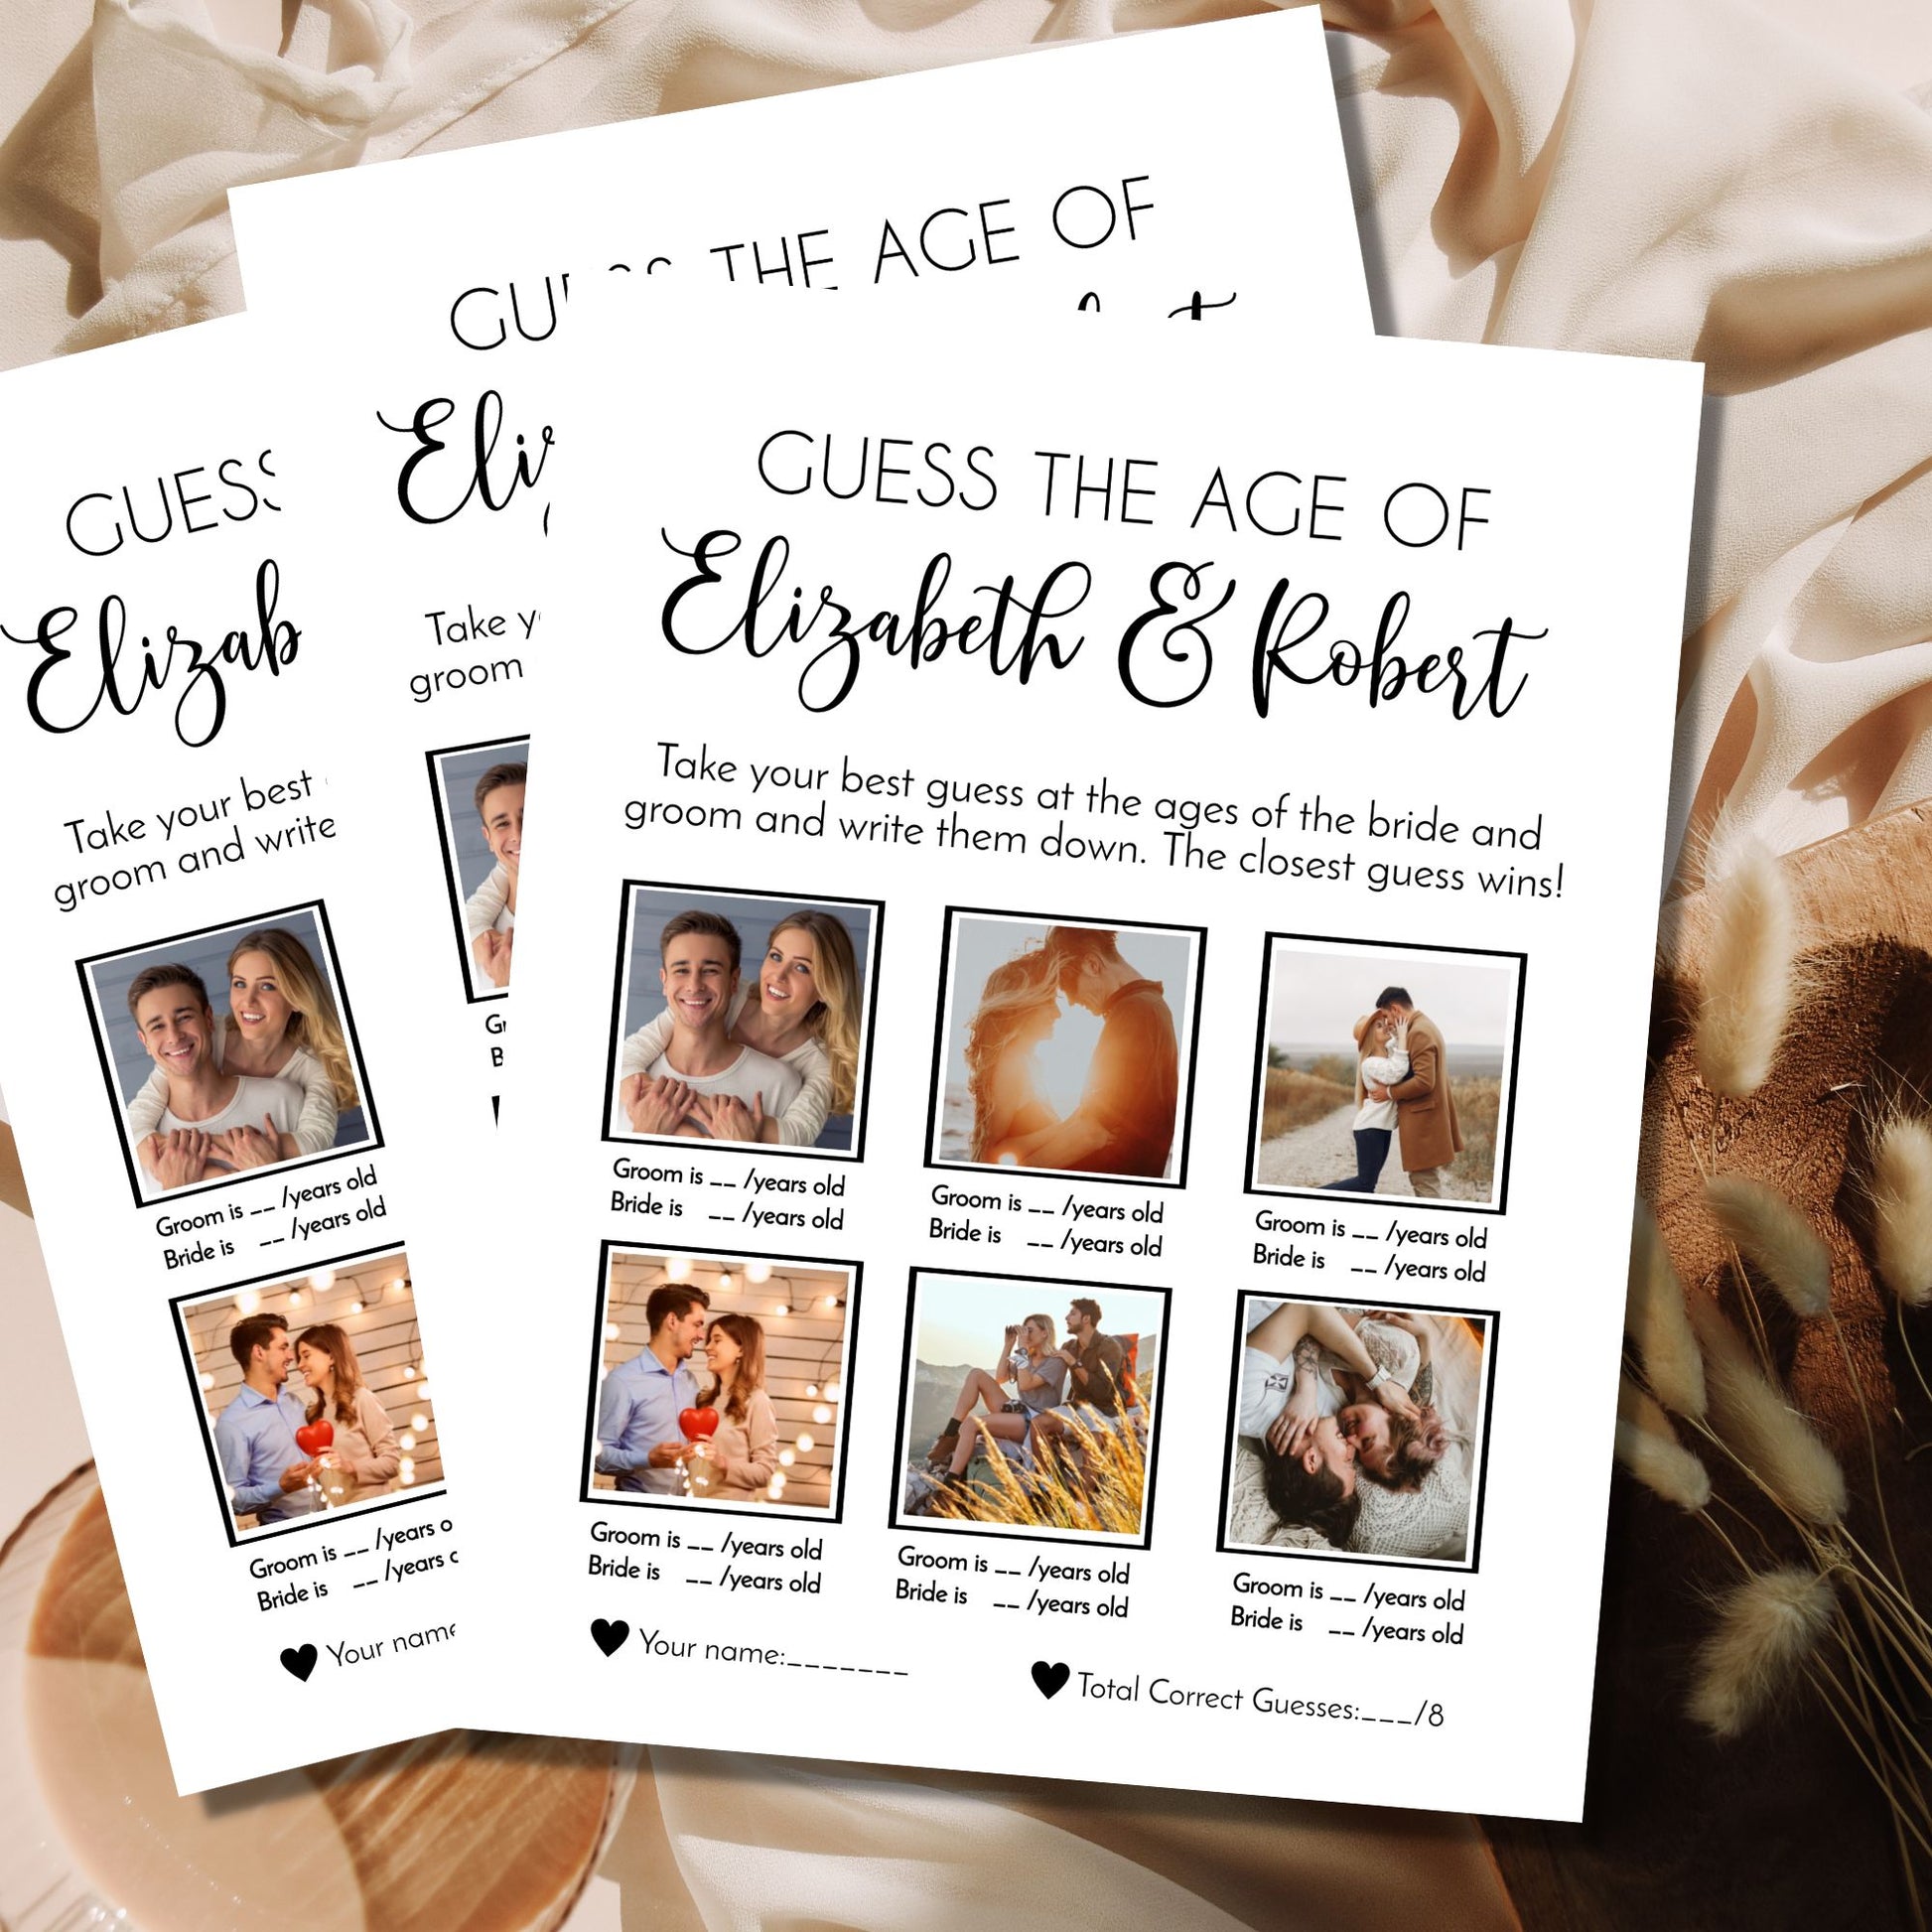 Guess the Age of the Bride and Groom Game Template